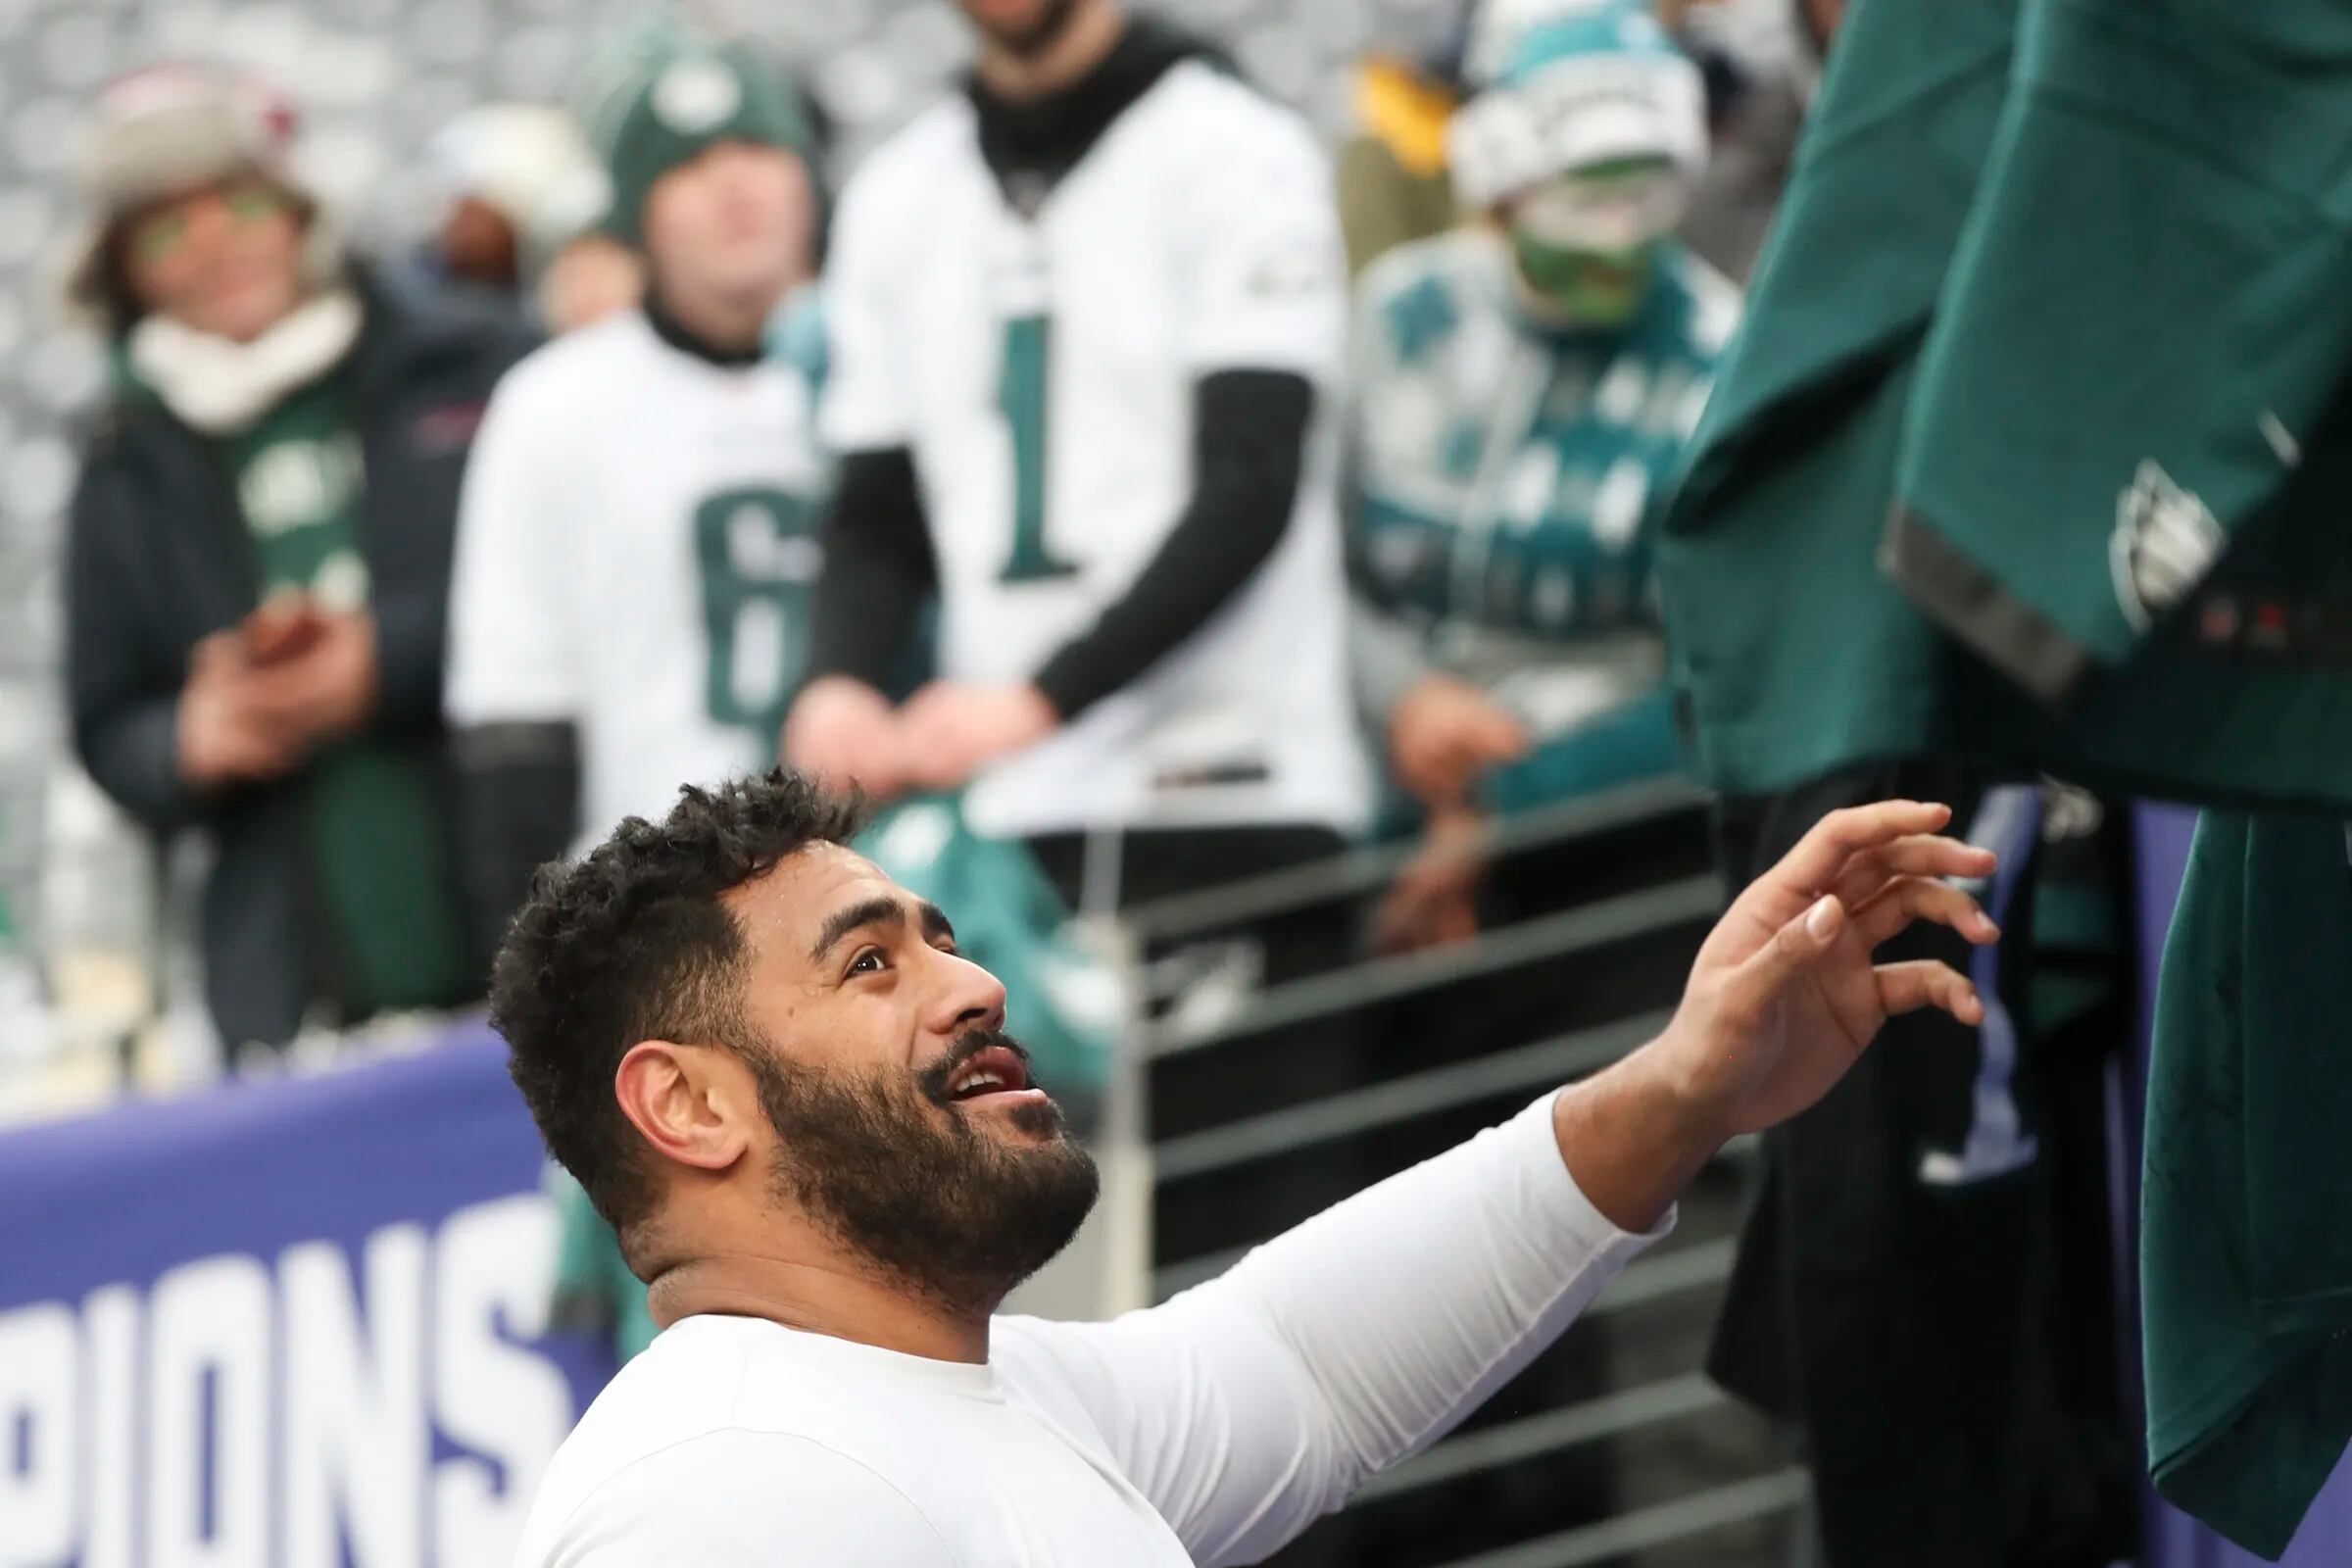 Photos from the Eagles' NFL Week 14 game against the Giants